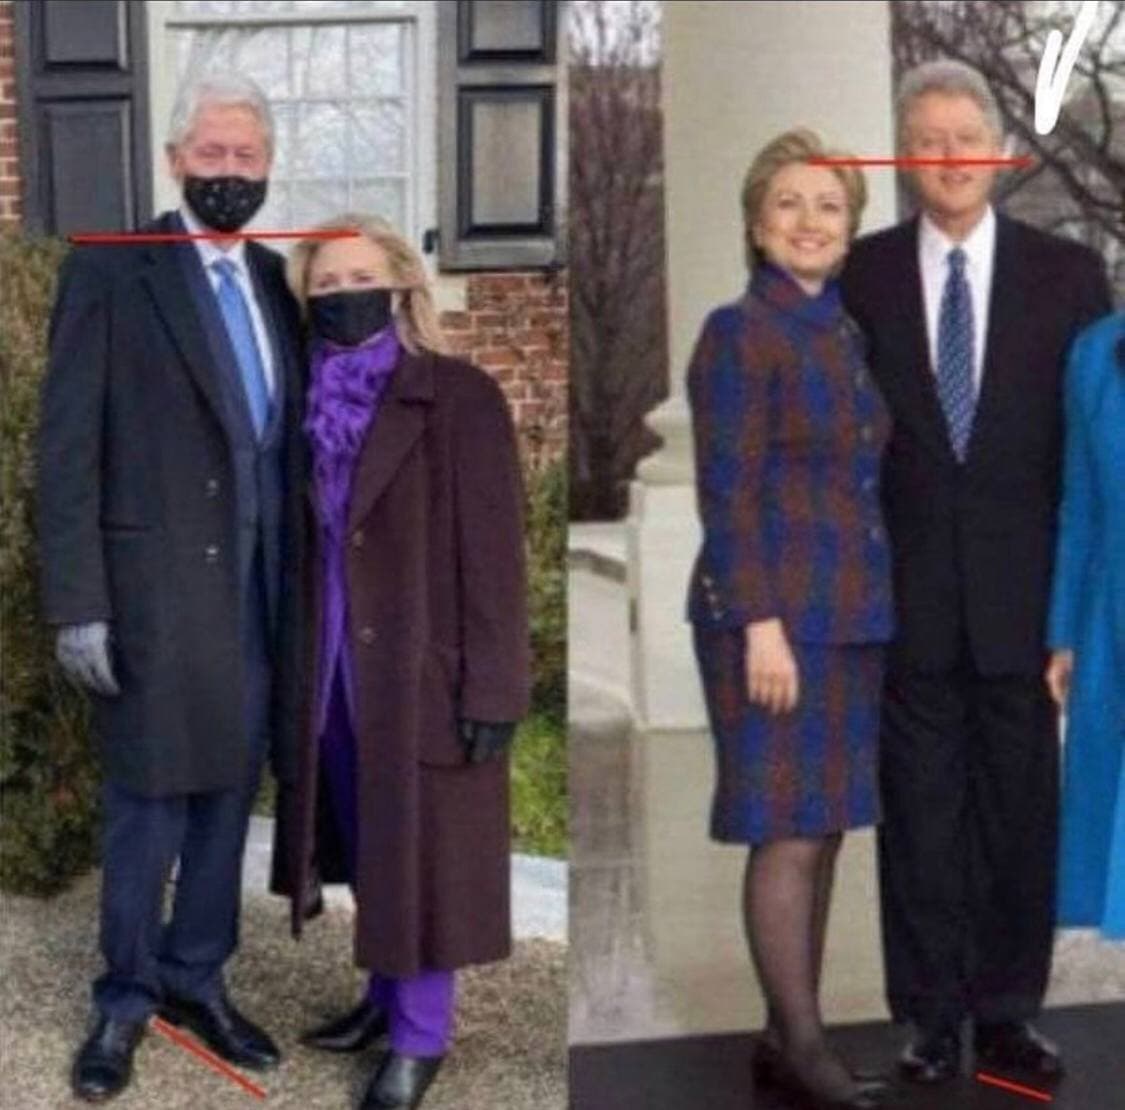 The clintons